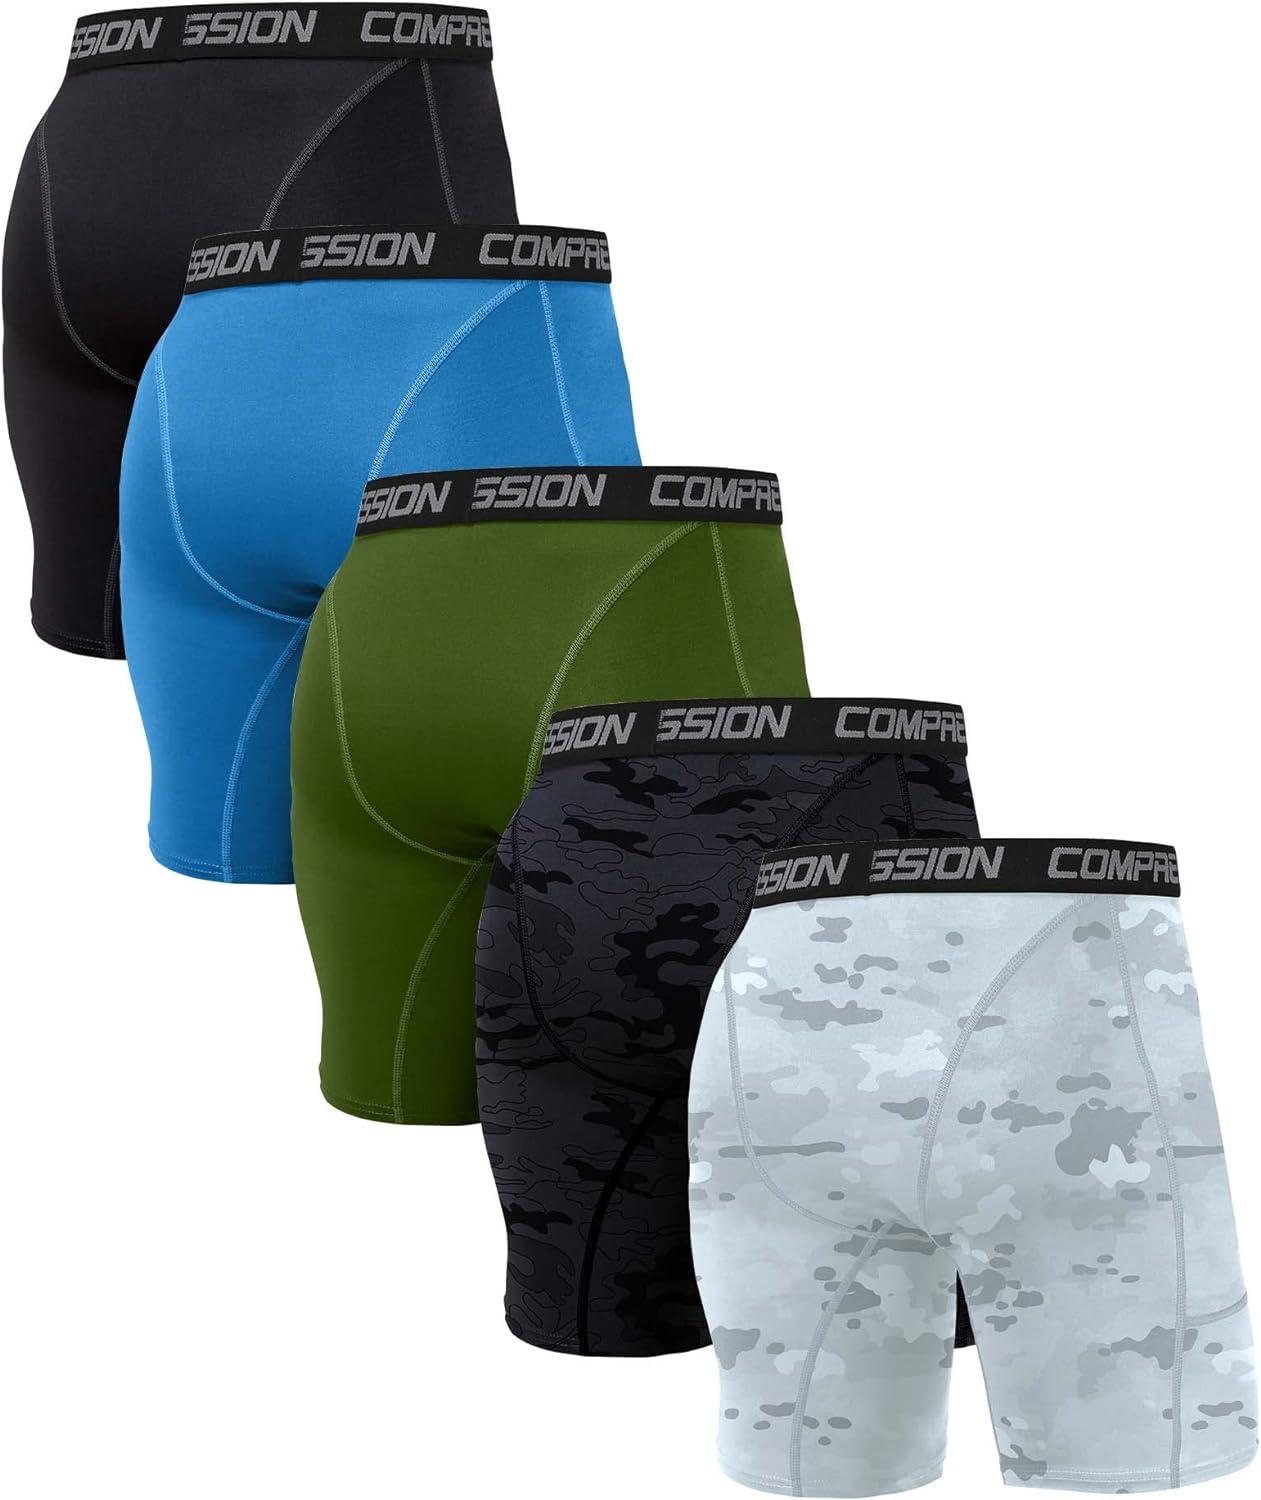 Holure Men's Performance Compression Shorts Athletic Running Underwear (3  or 4 or 5 Pack) 3 Pack:black/Navy/Camo White Large